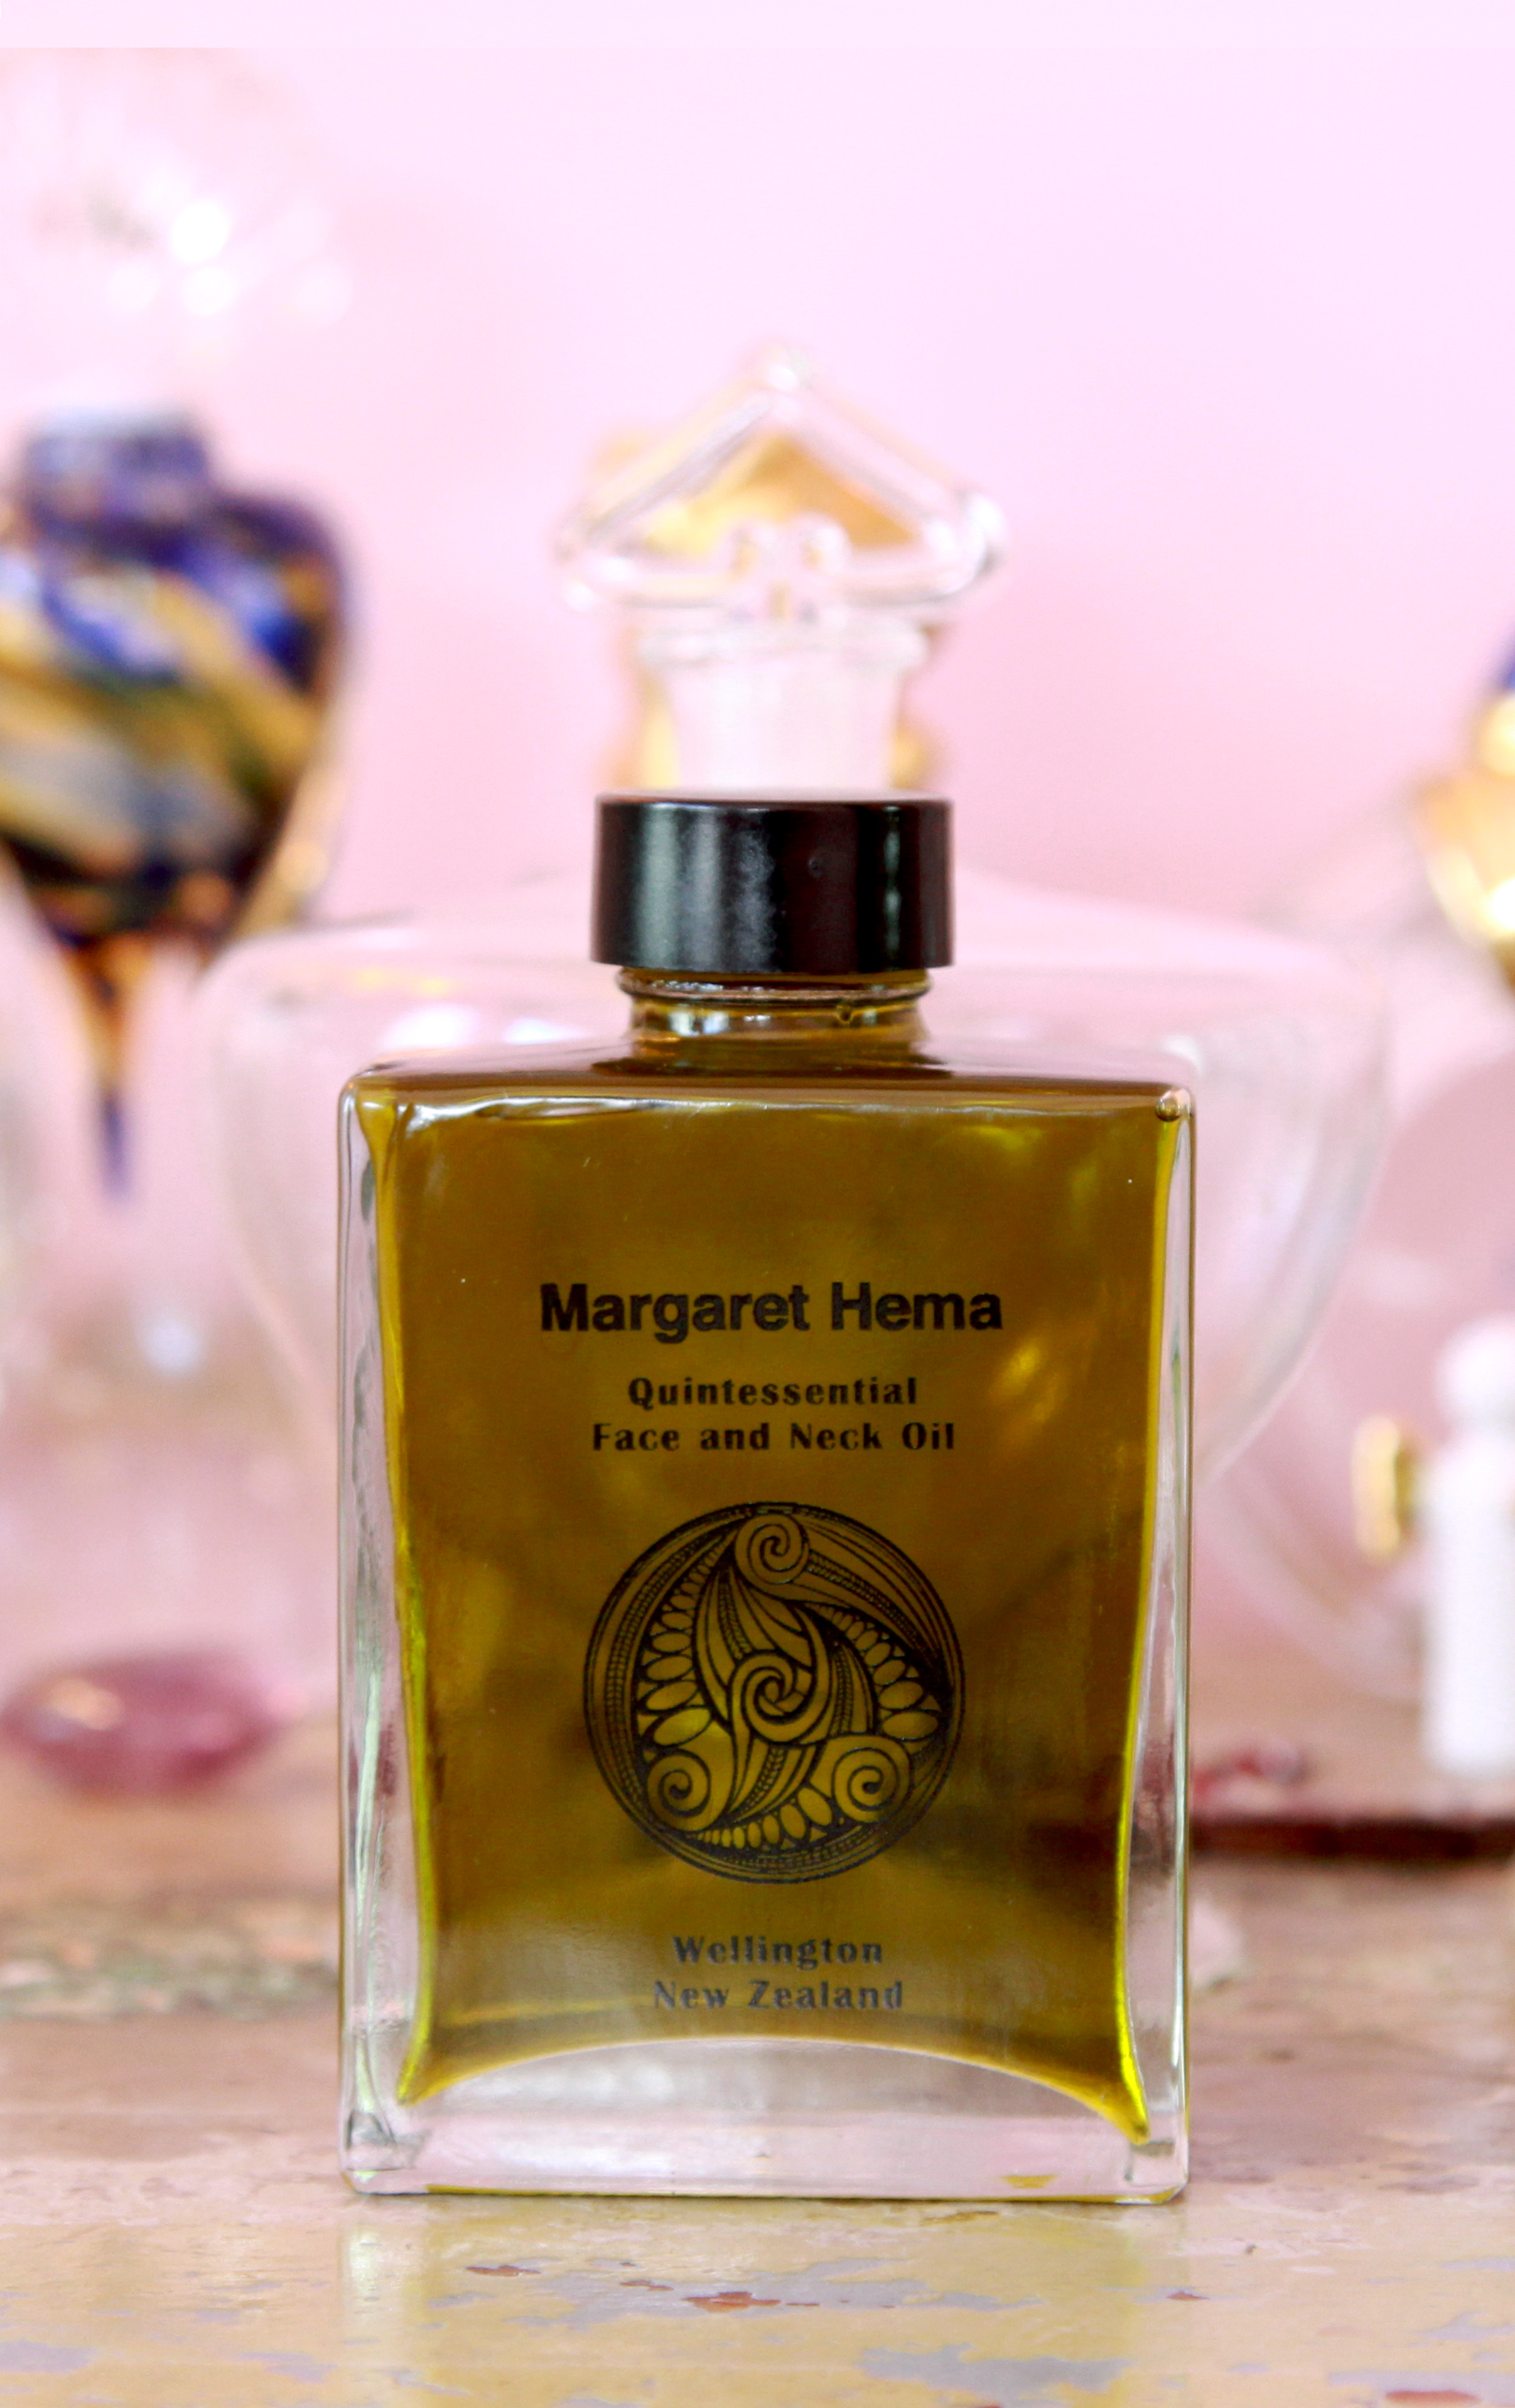 Quintessential Face and Neck Oil — $160.00